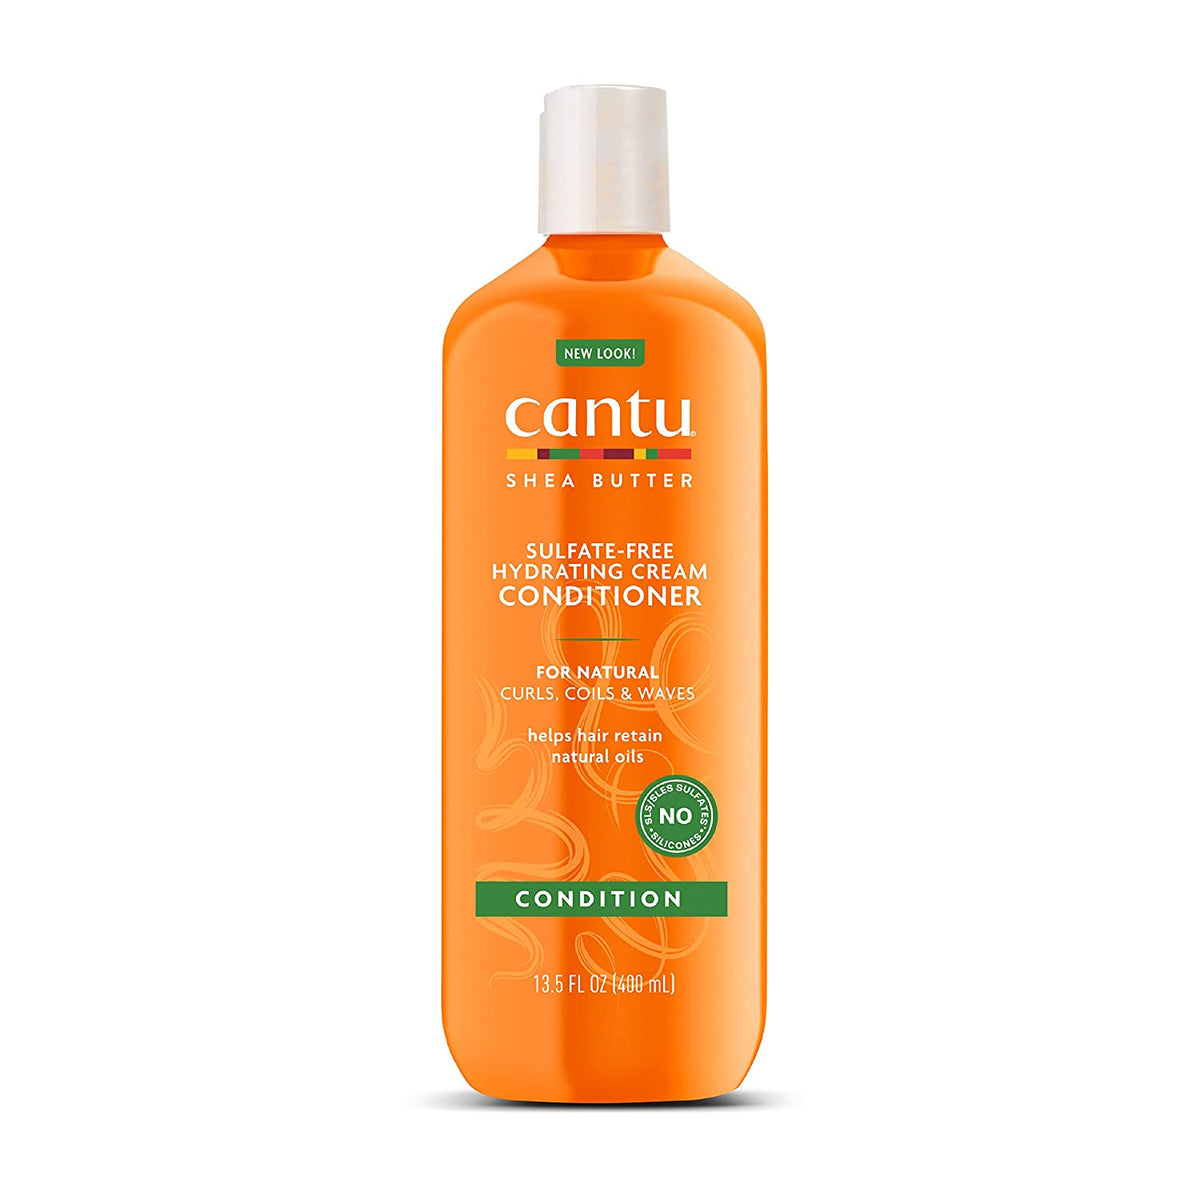 CANTU NATURAL HAIR HYDRATING SULFATE-FREE CONDITIONER 13.05OZ